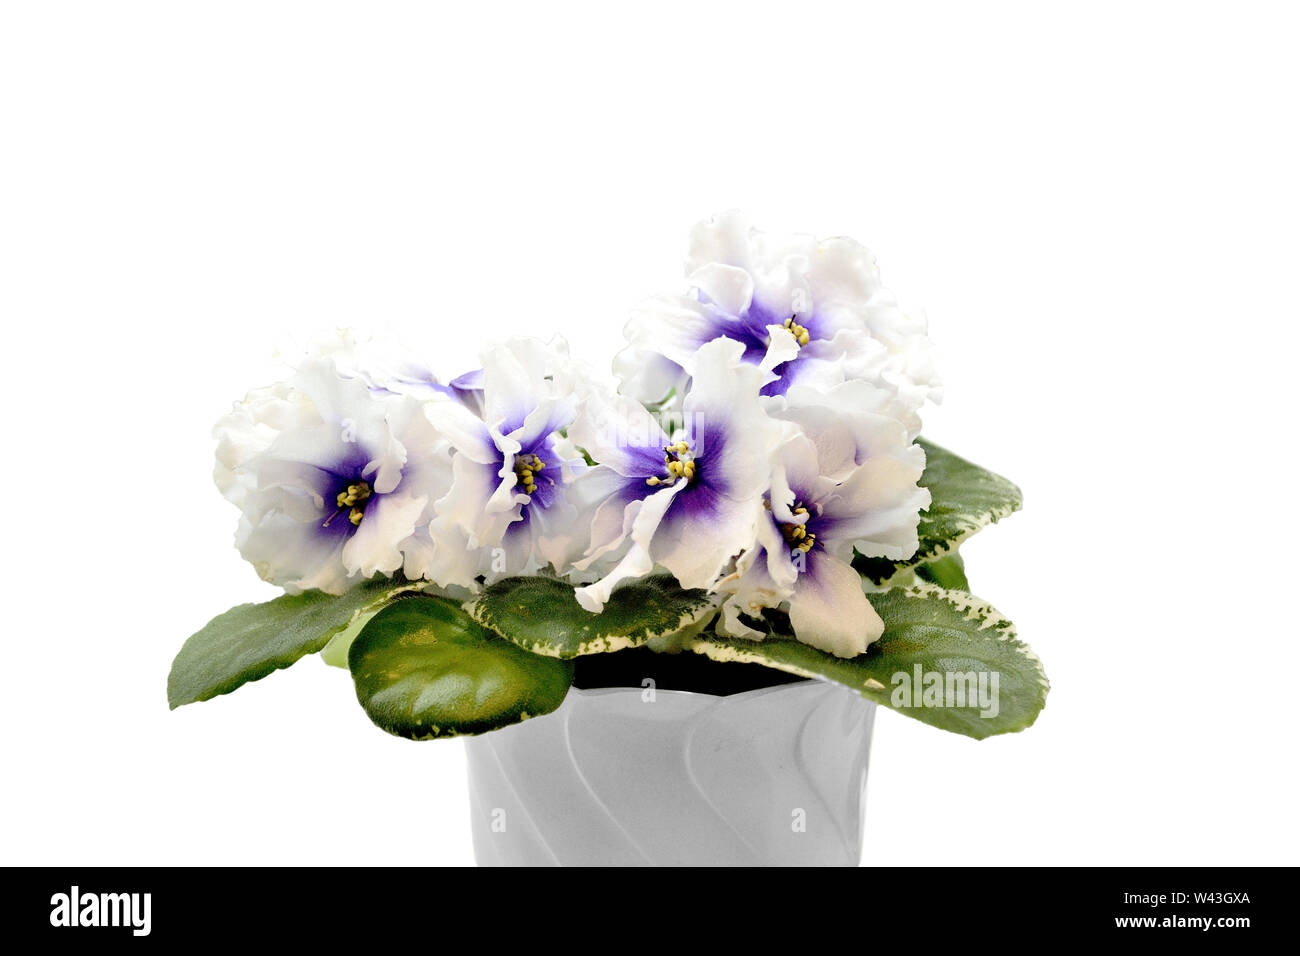 Beautiful blossoming plant of Senpolia or Uzumbar violet (saintpaulia) with delicate purple with white petals and variegated leaves in pot. Decorative Stock Photo